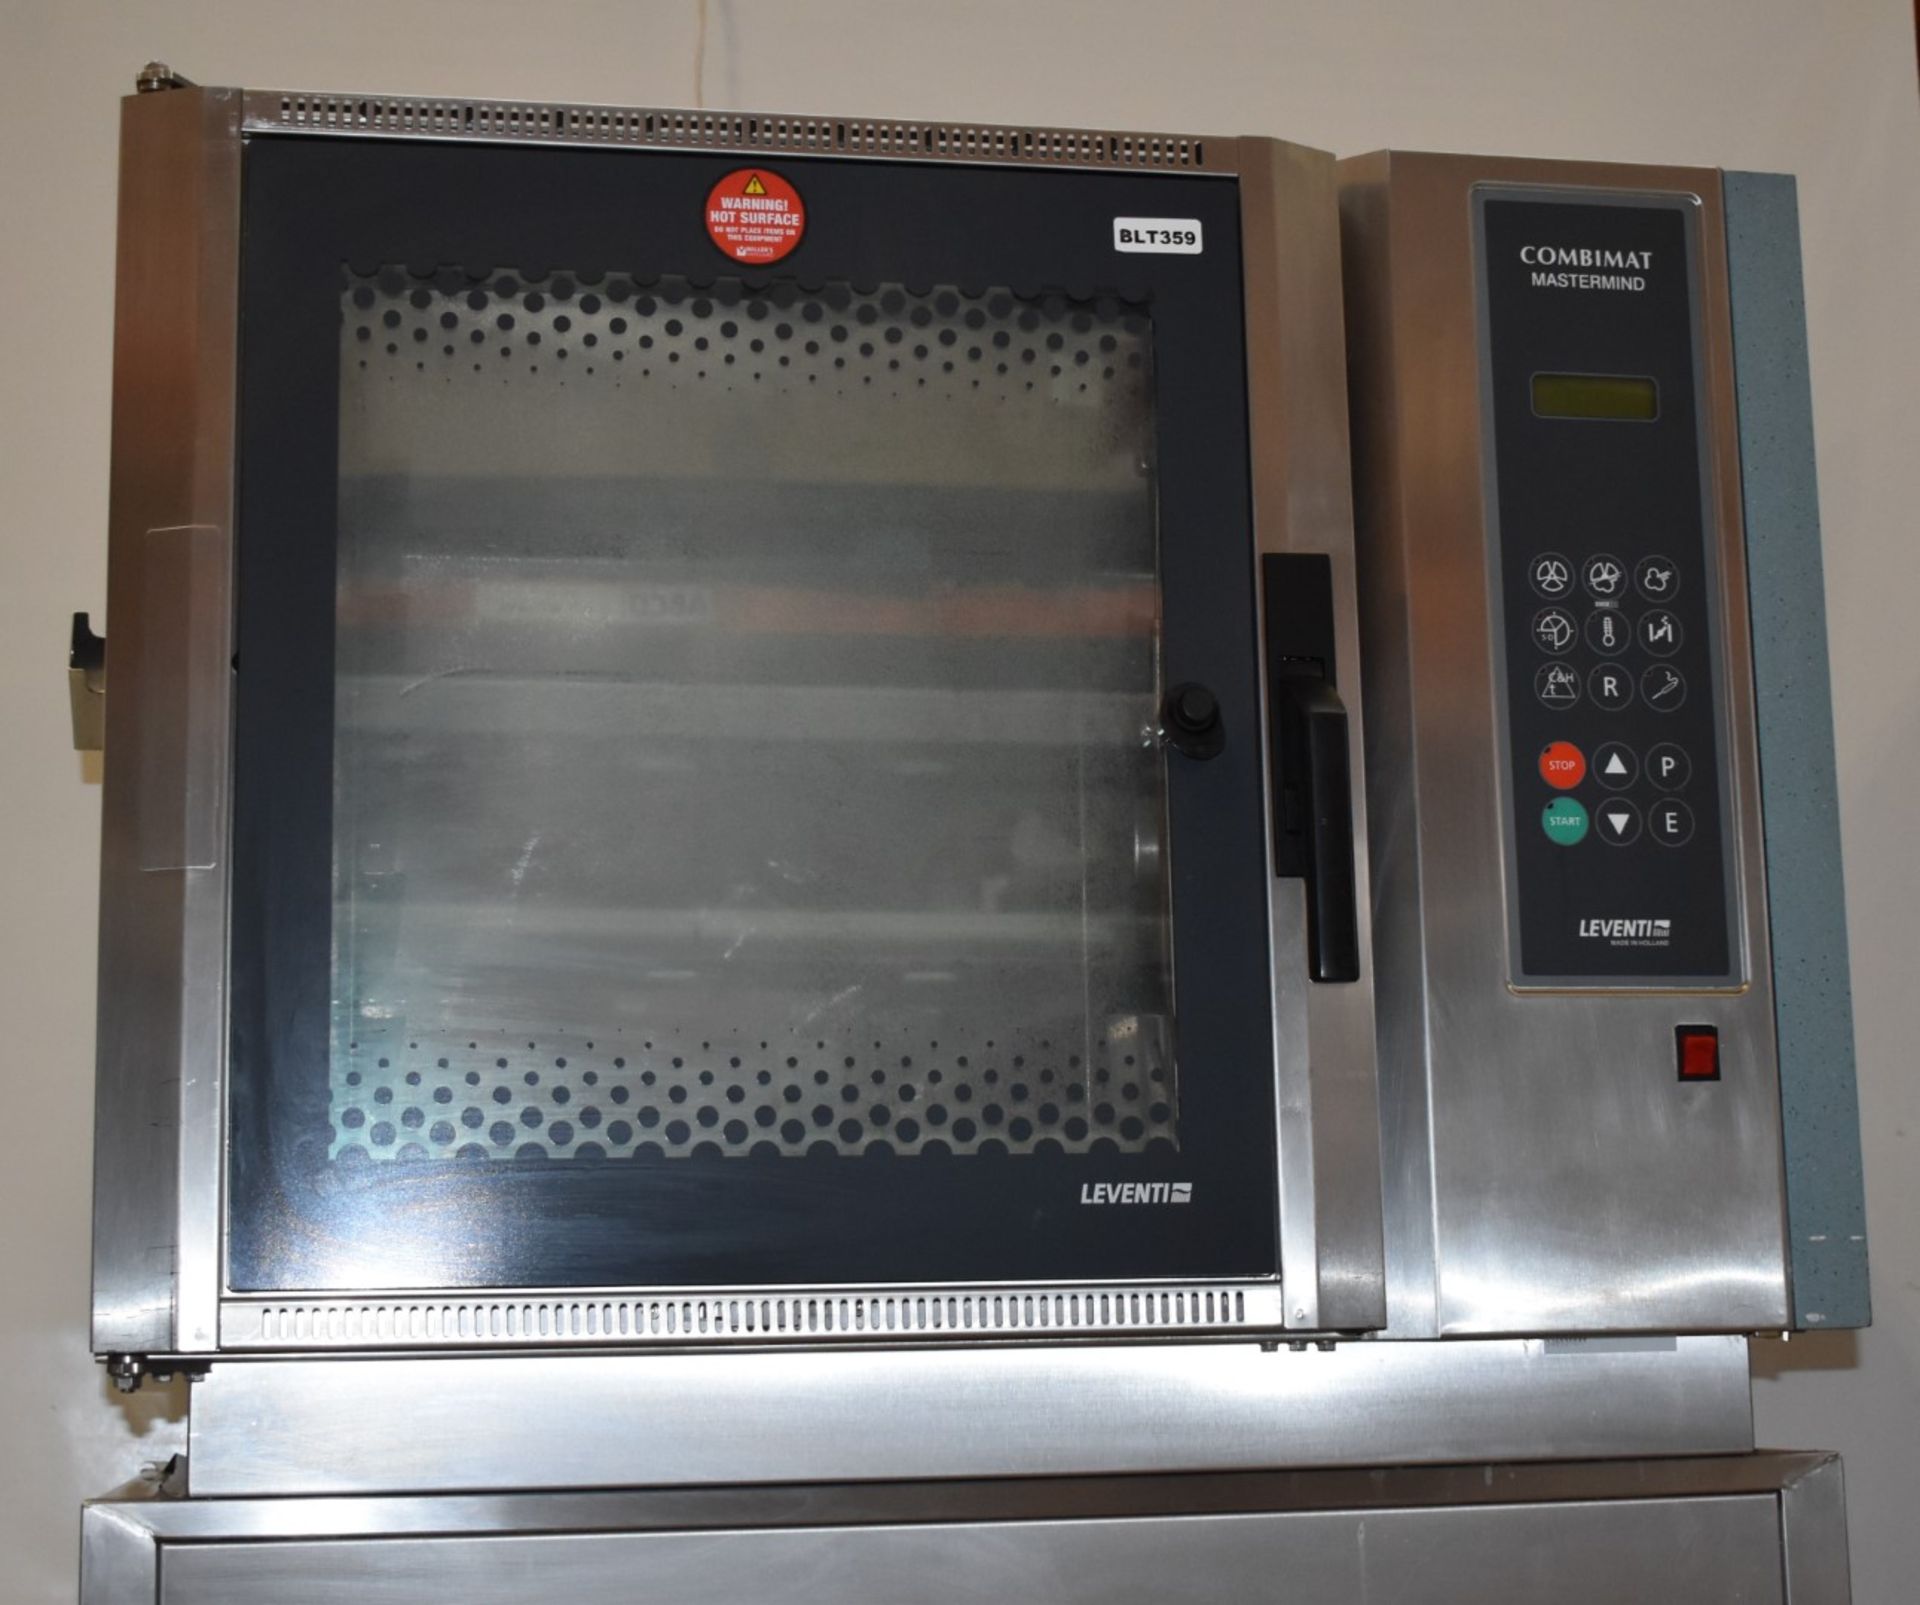 1 x Leventi Combimat Mastermind Steamer Oven - 6 Grid - 3 Phase - Includes Mobile Pedestal Base With - Image 3 of 14